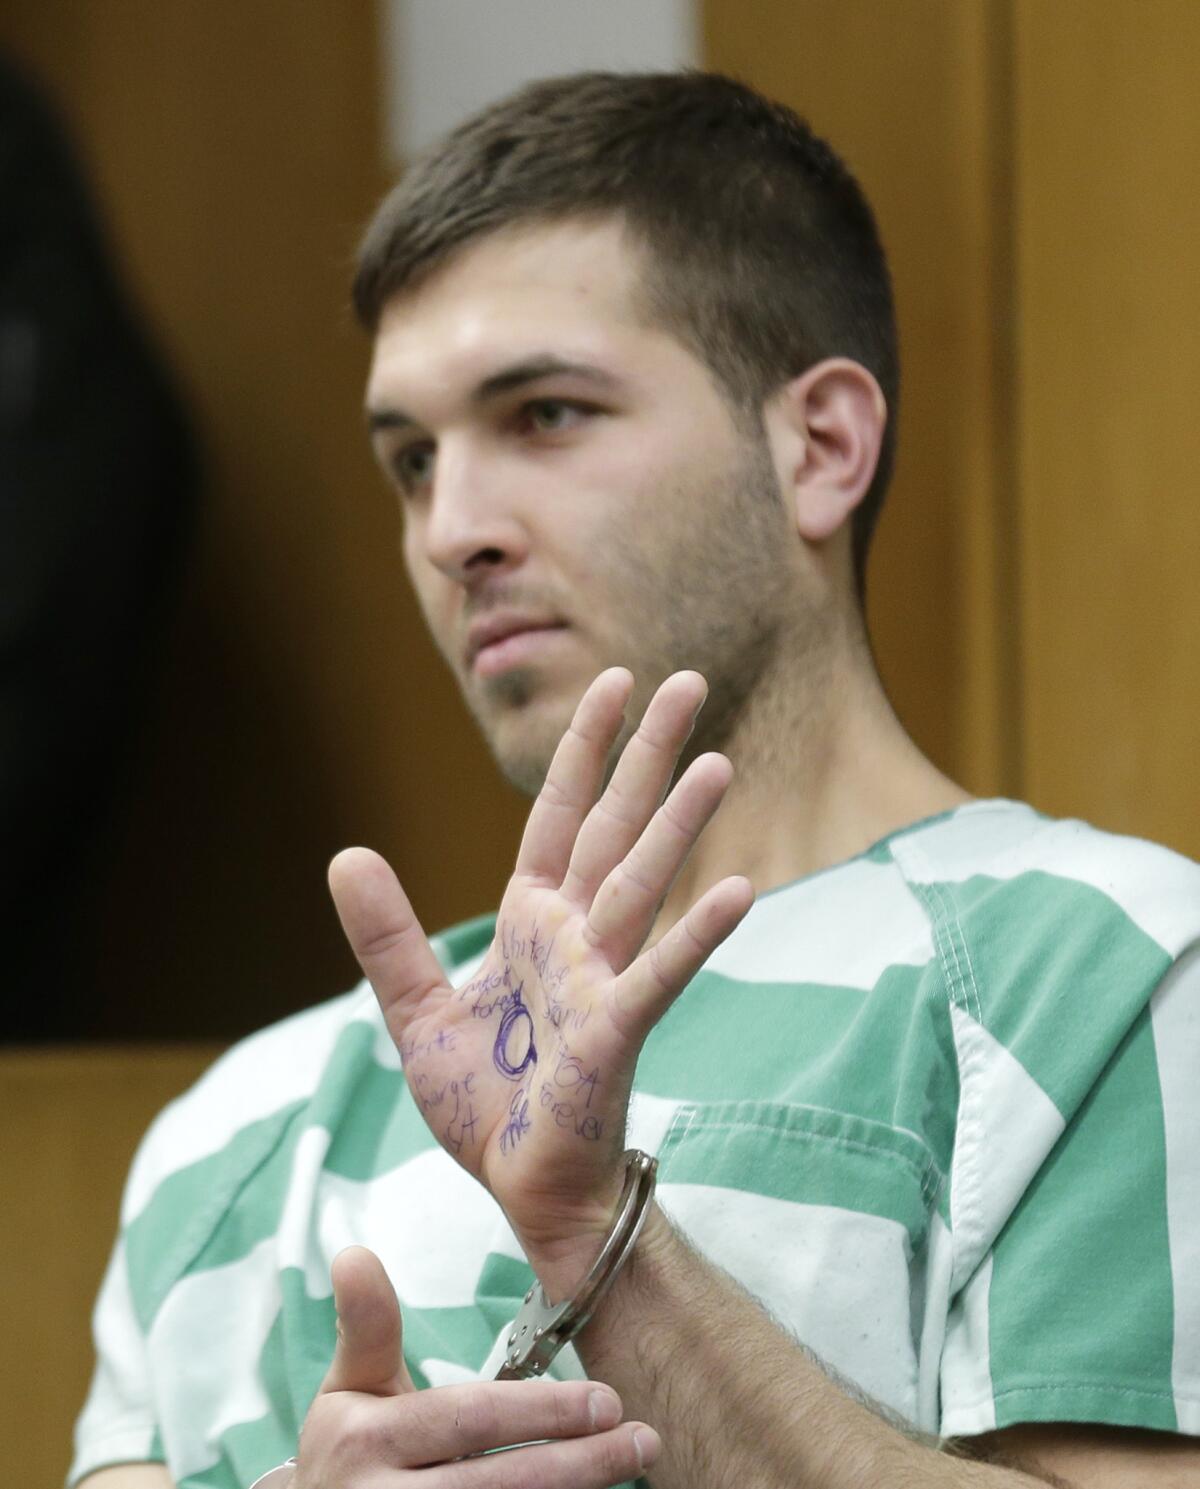 Anthony Comello displays writing on his hand during his extradition hearing in Toms River, N.J.